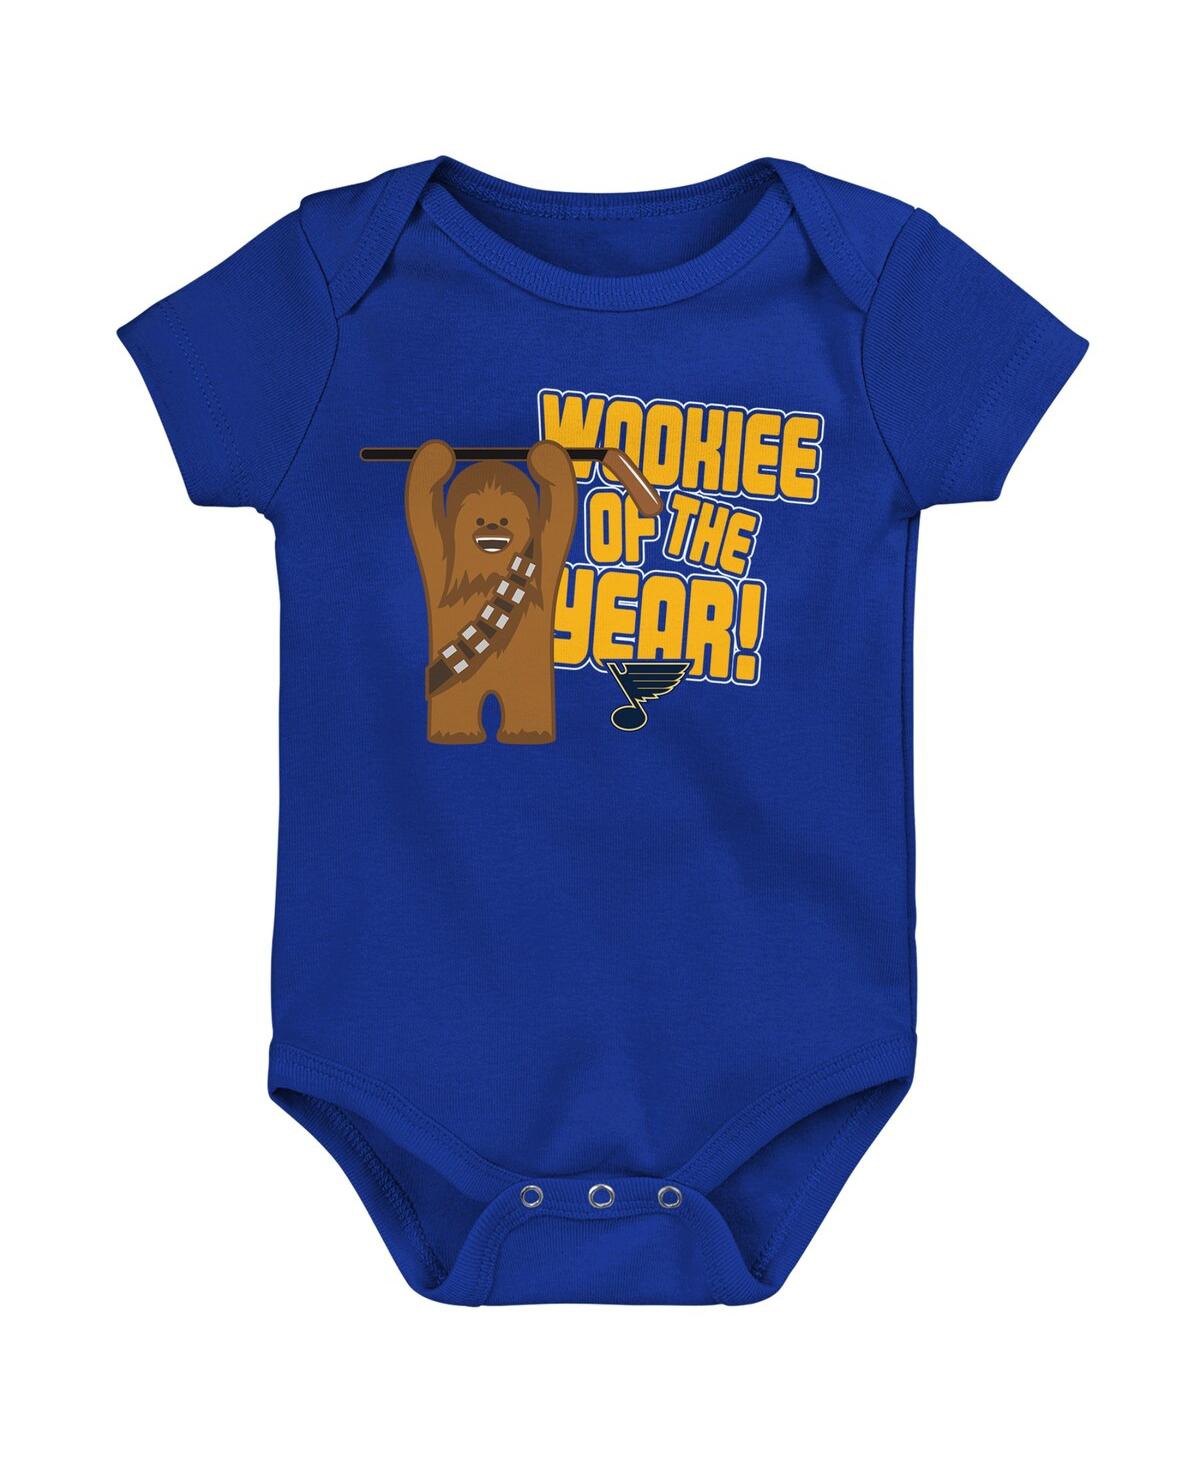 Outerstuff Babies' Infant Boys And Girls Blue St. Louis Blues Star Wars Wookie Of The Year Bodysuit